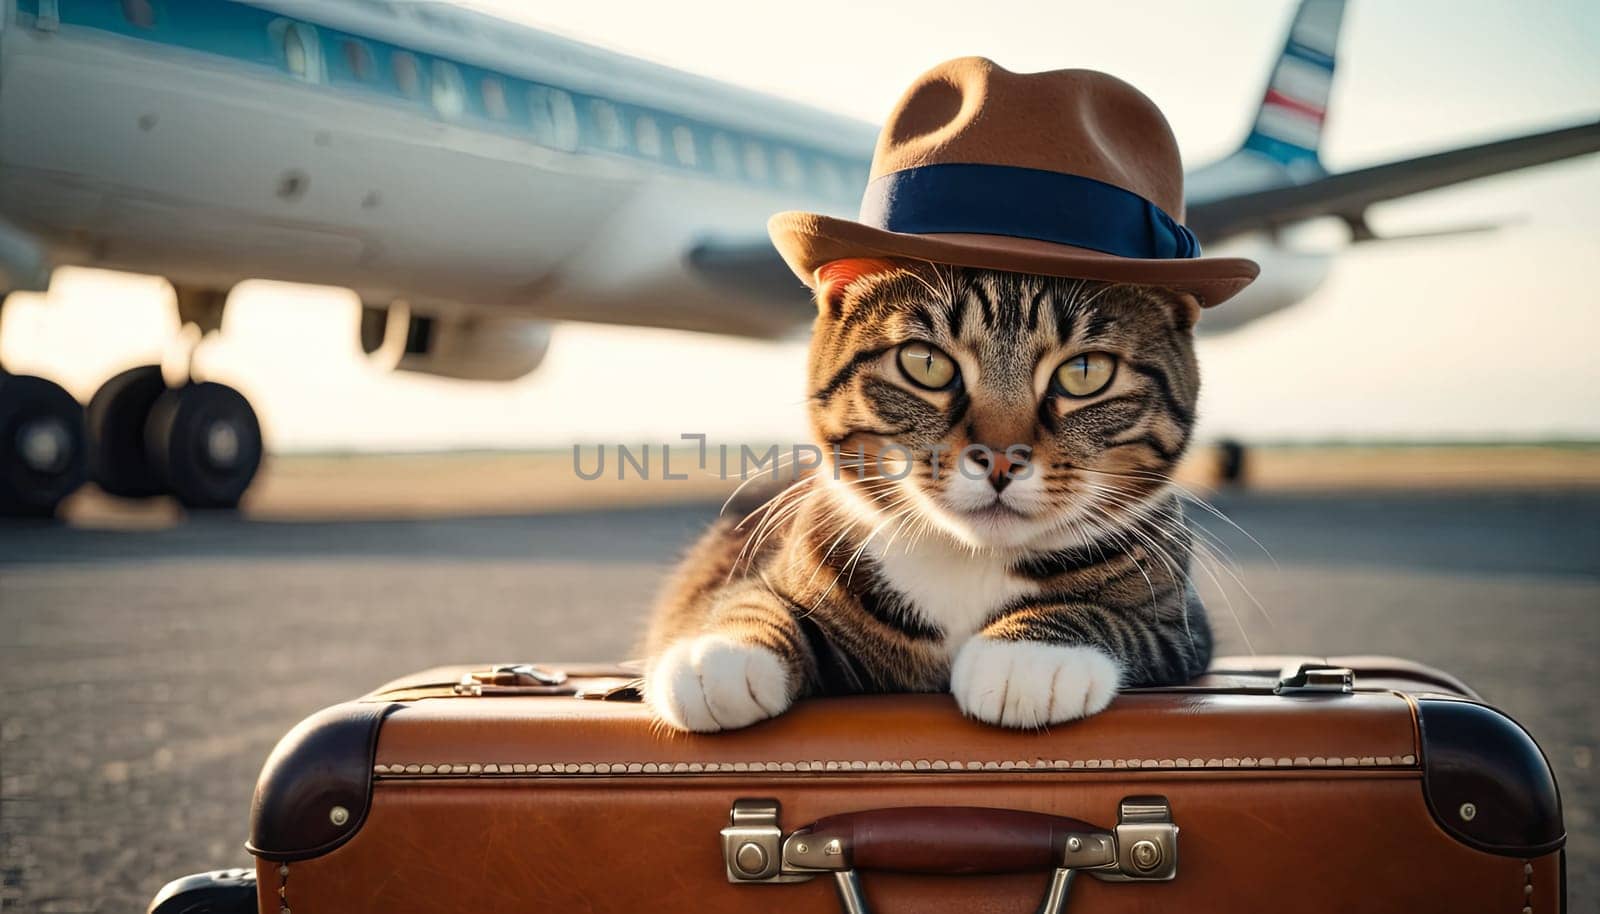 Traveler cat at airport, private jet awaits. Cat adorned with stylish hat sits atop suitcase, evoking sense of companionship in travel. by Matiunina